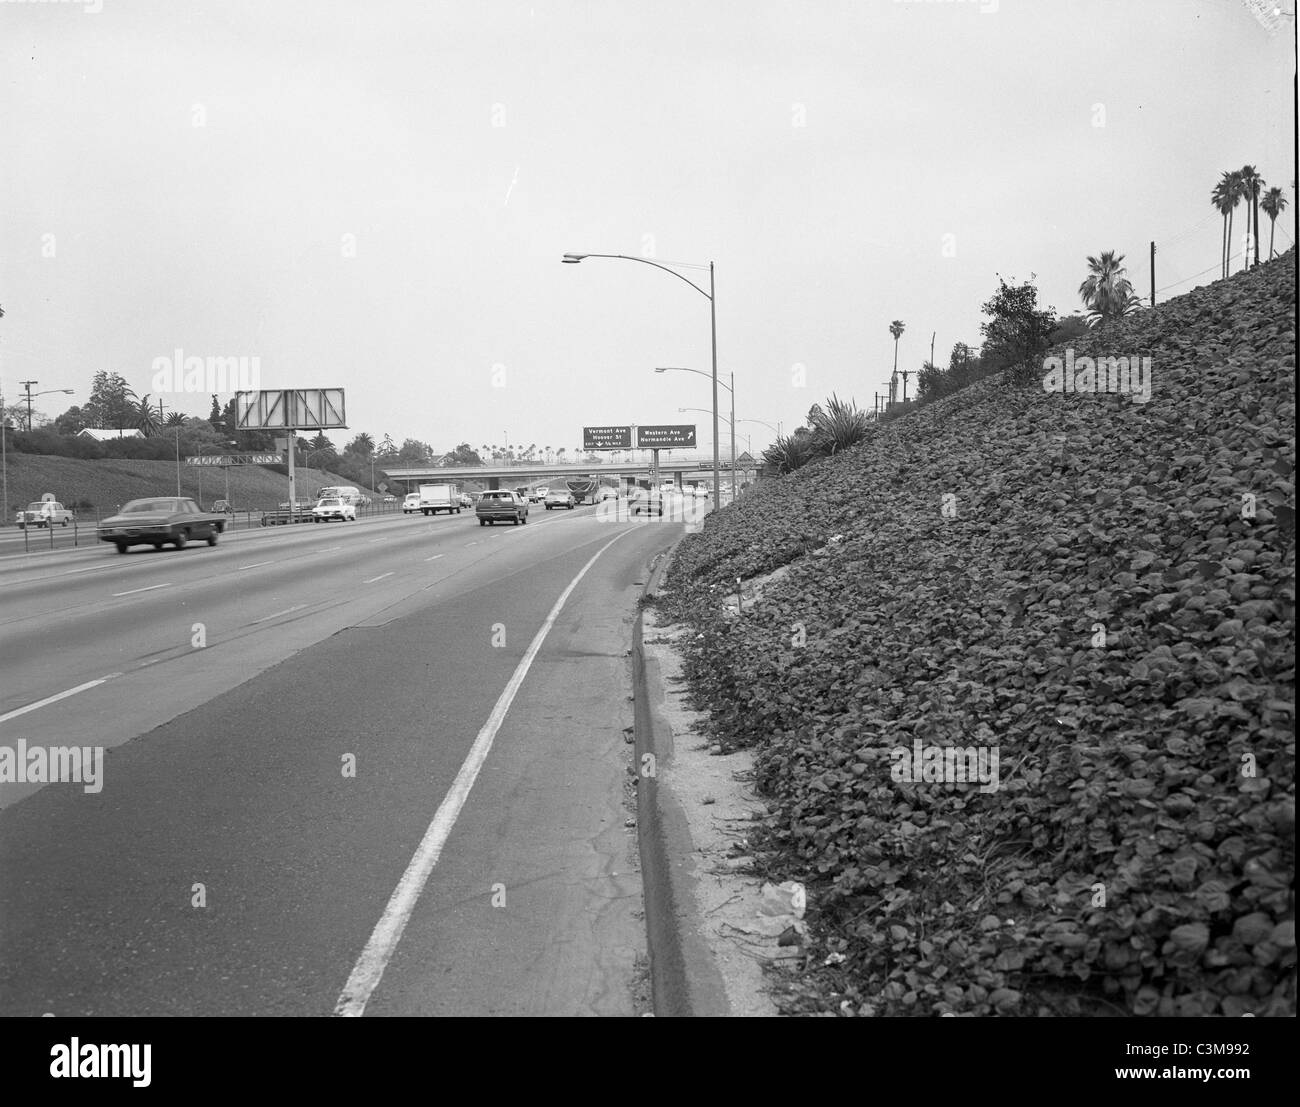 Los Angeles 1960s Negative, Hollywood Freeway Highway Scene, L.A. California black and white Stock Photo